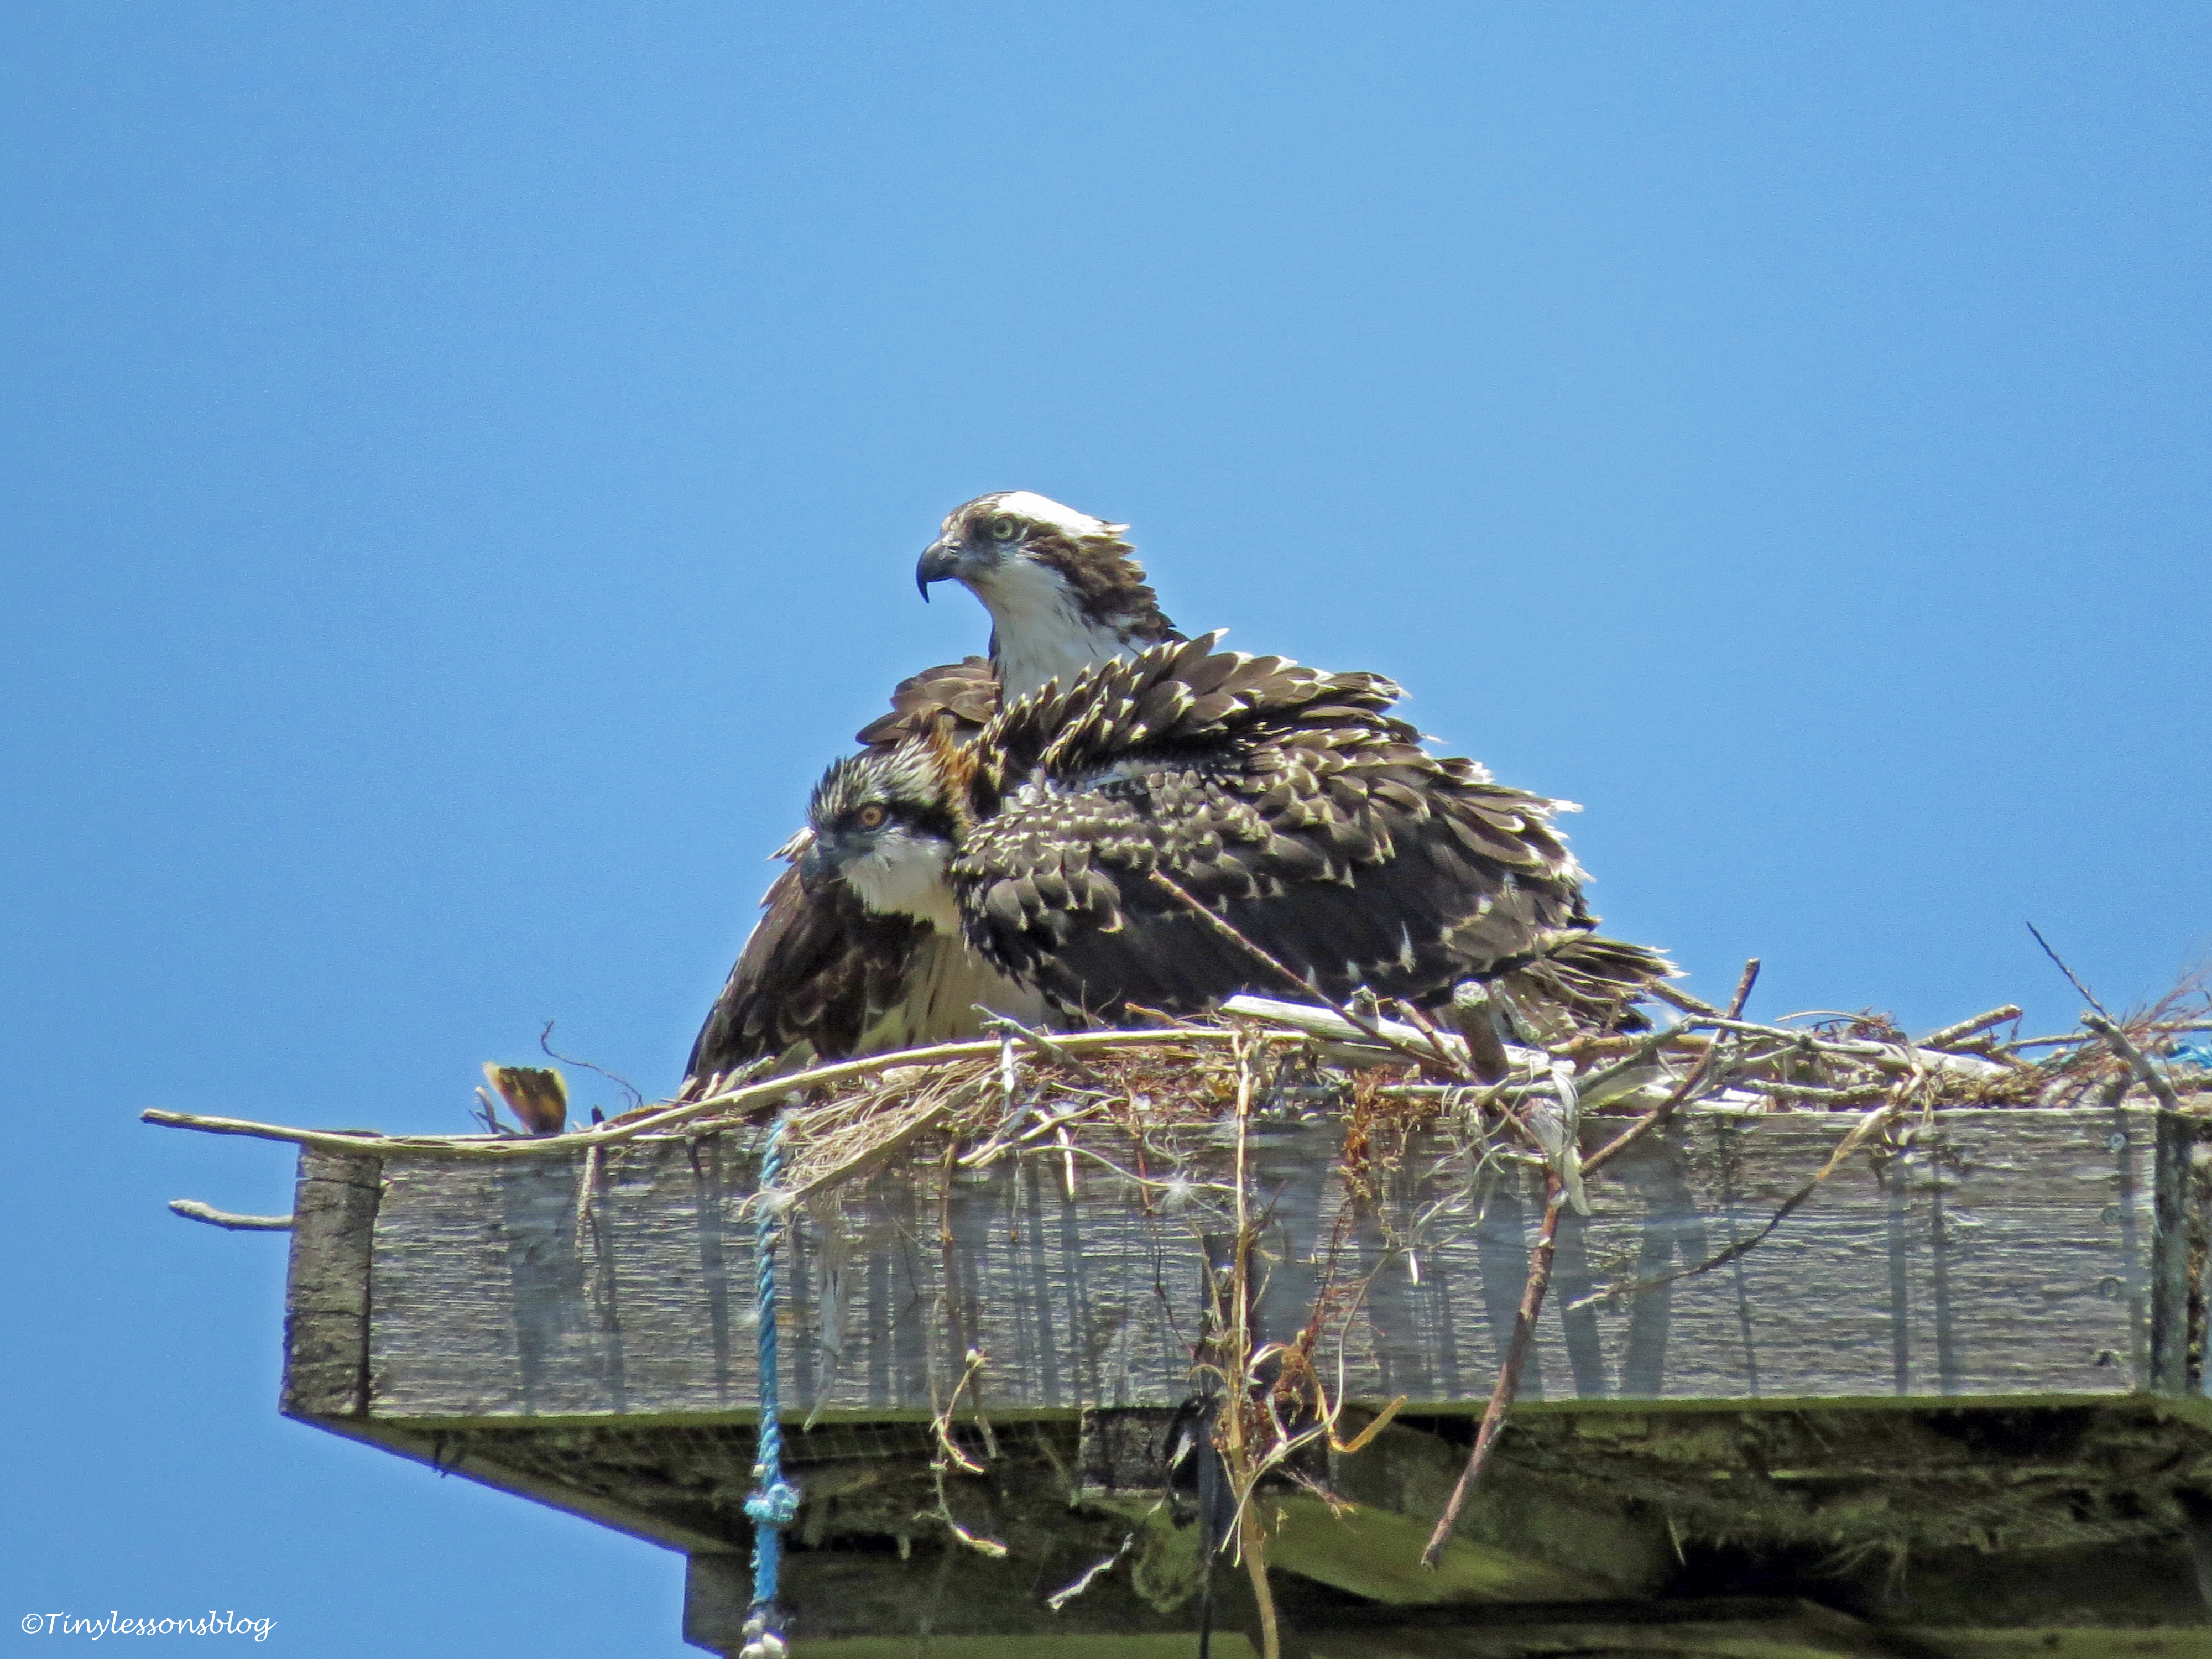 Female osprey and an osprey chick Sand Key park Clearwater Florida